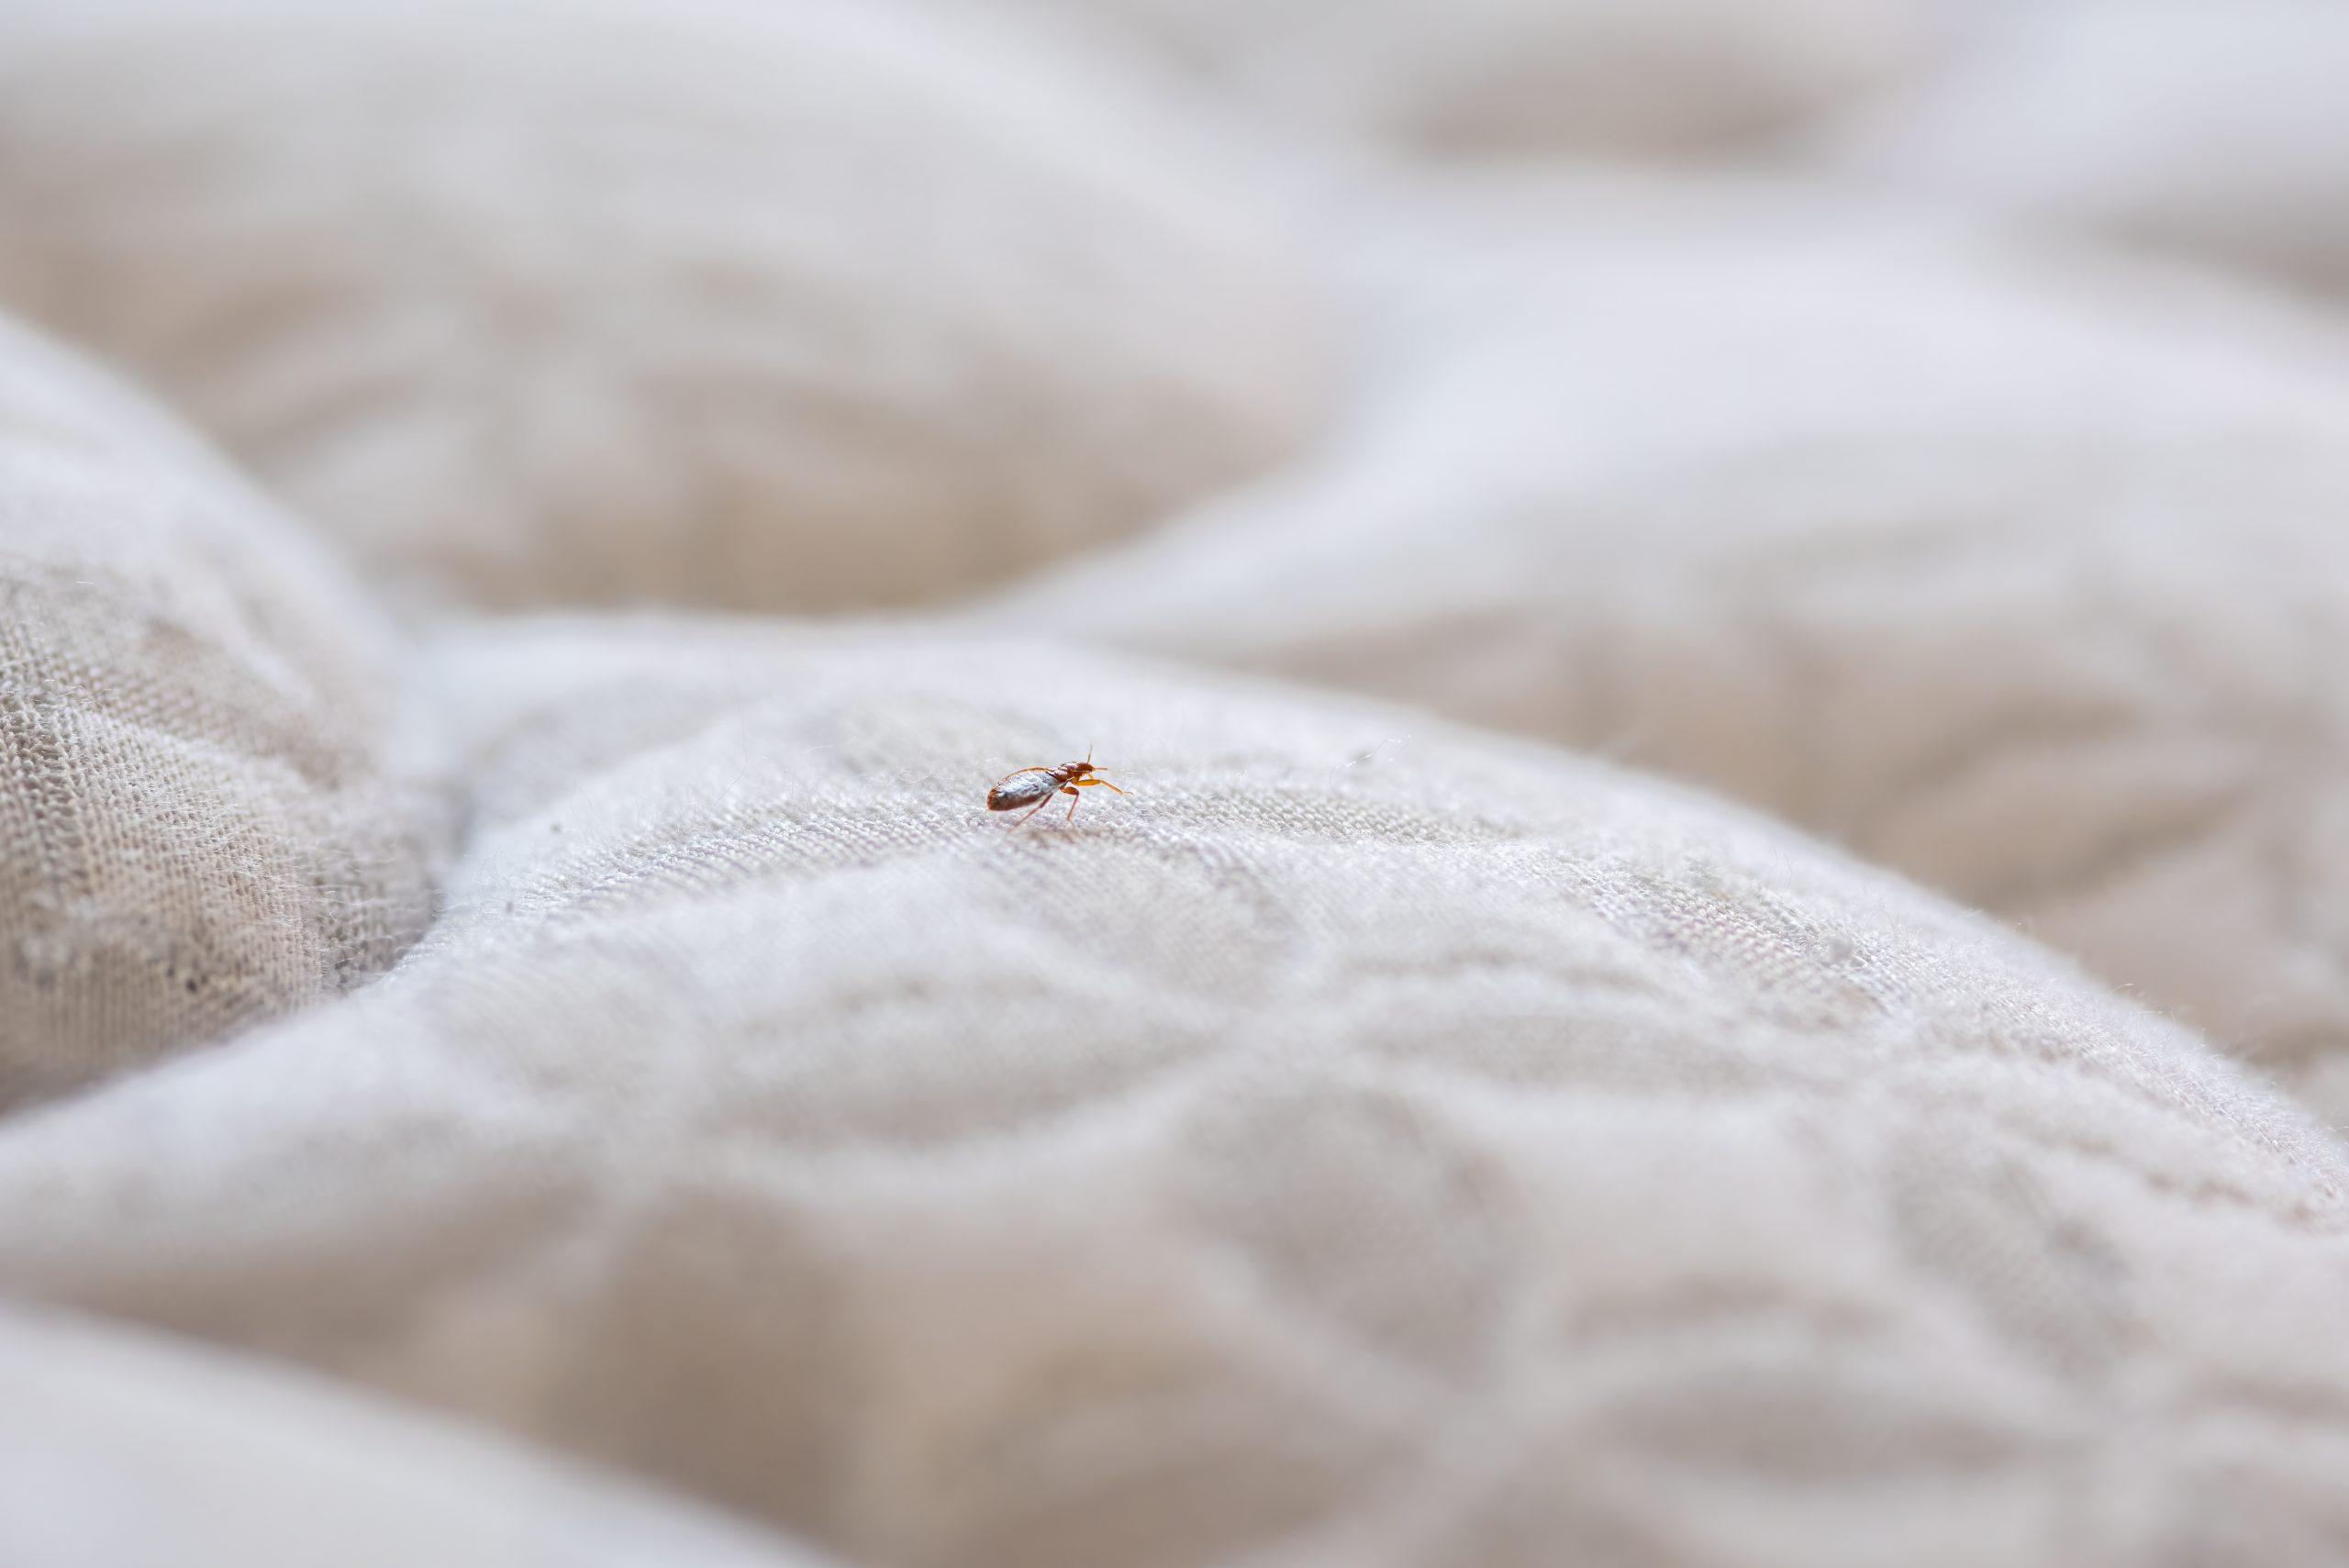 What do bed bug eggs look like on a mattress?